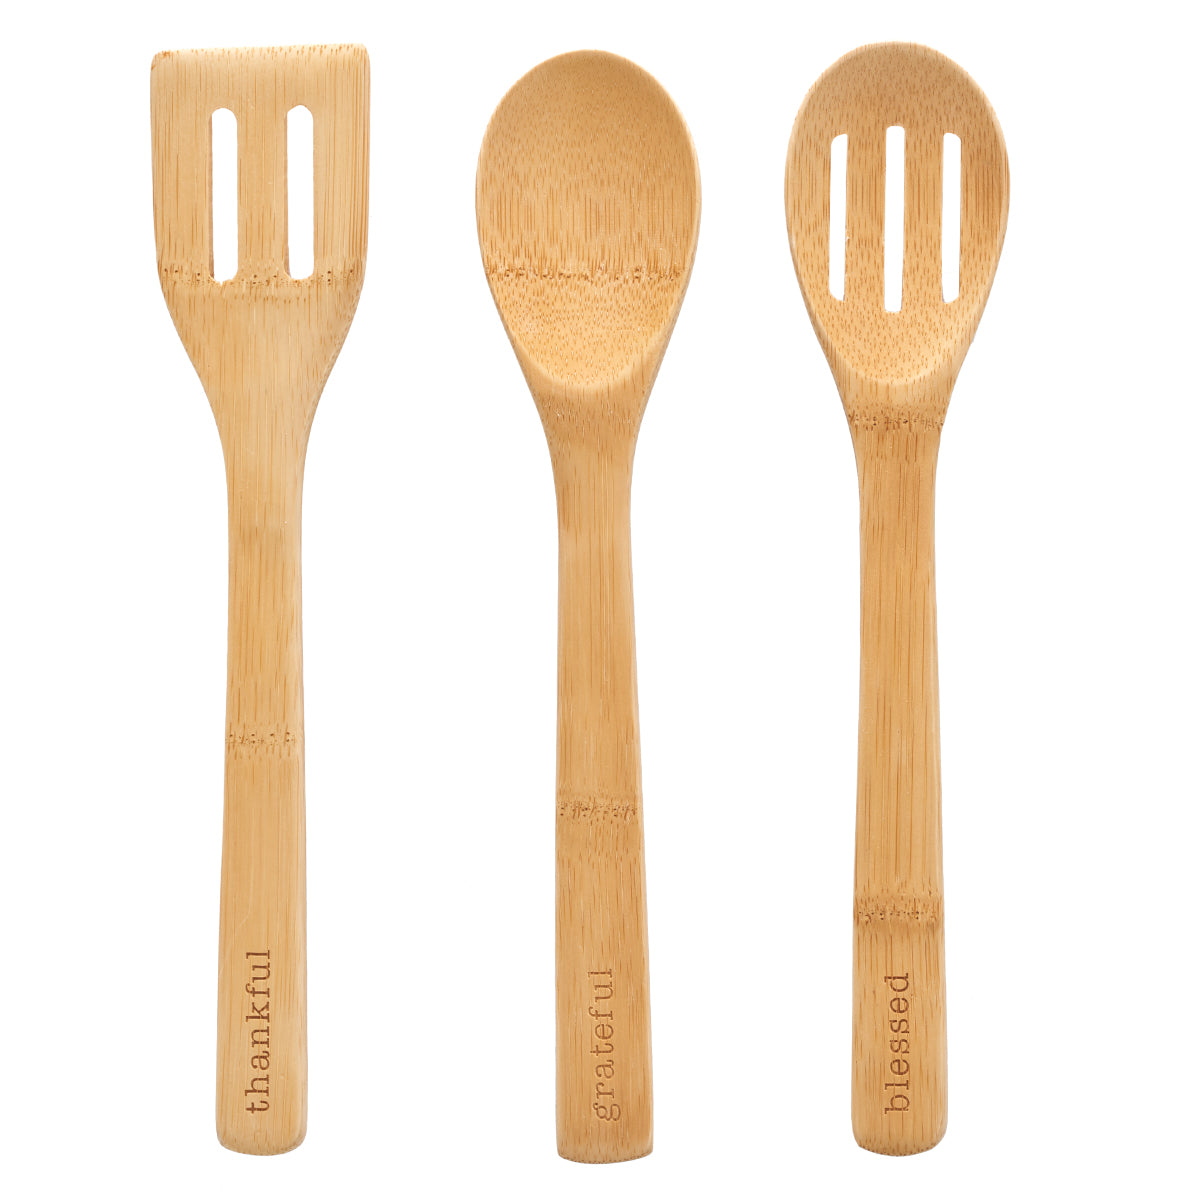 Image of Thankful, Grateful, Blessed Bamboo Spoon Set other